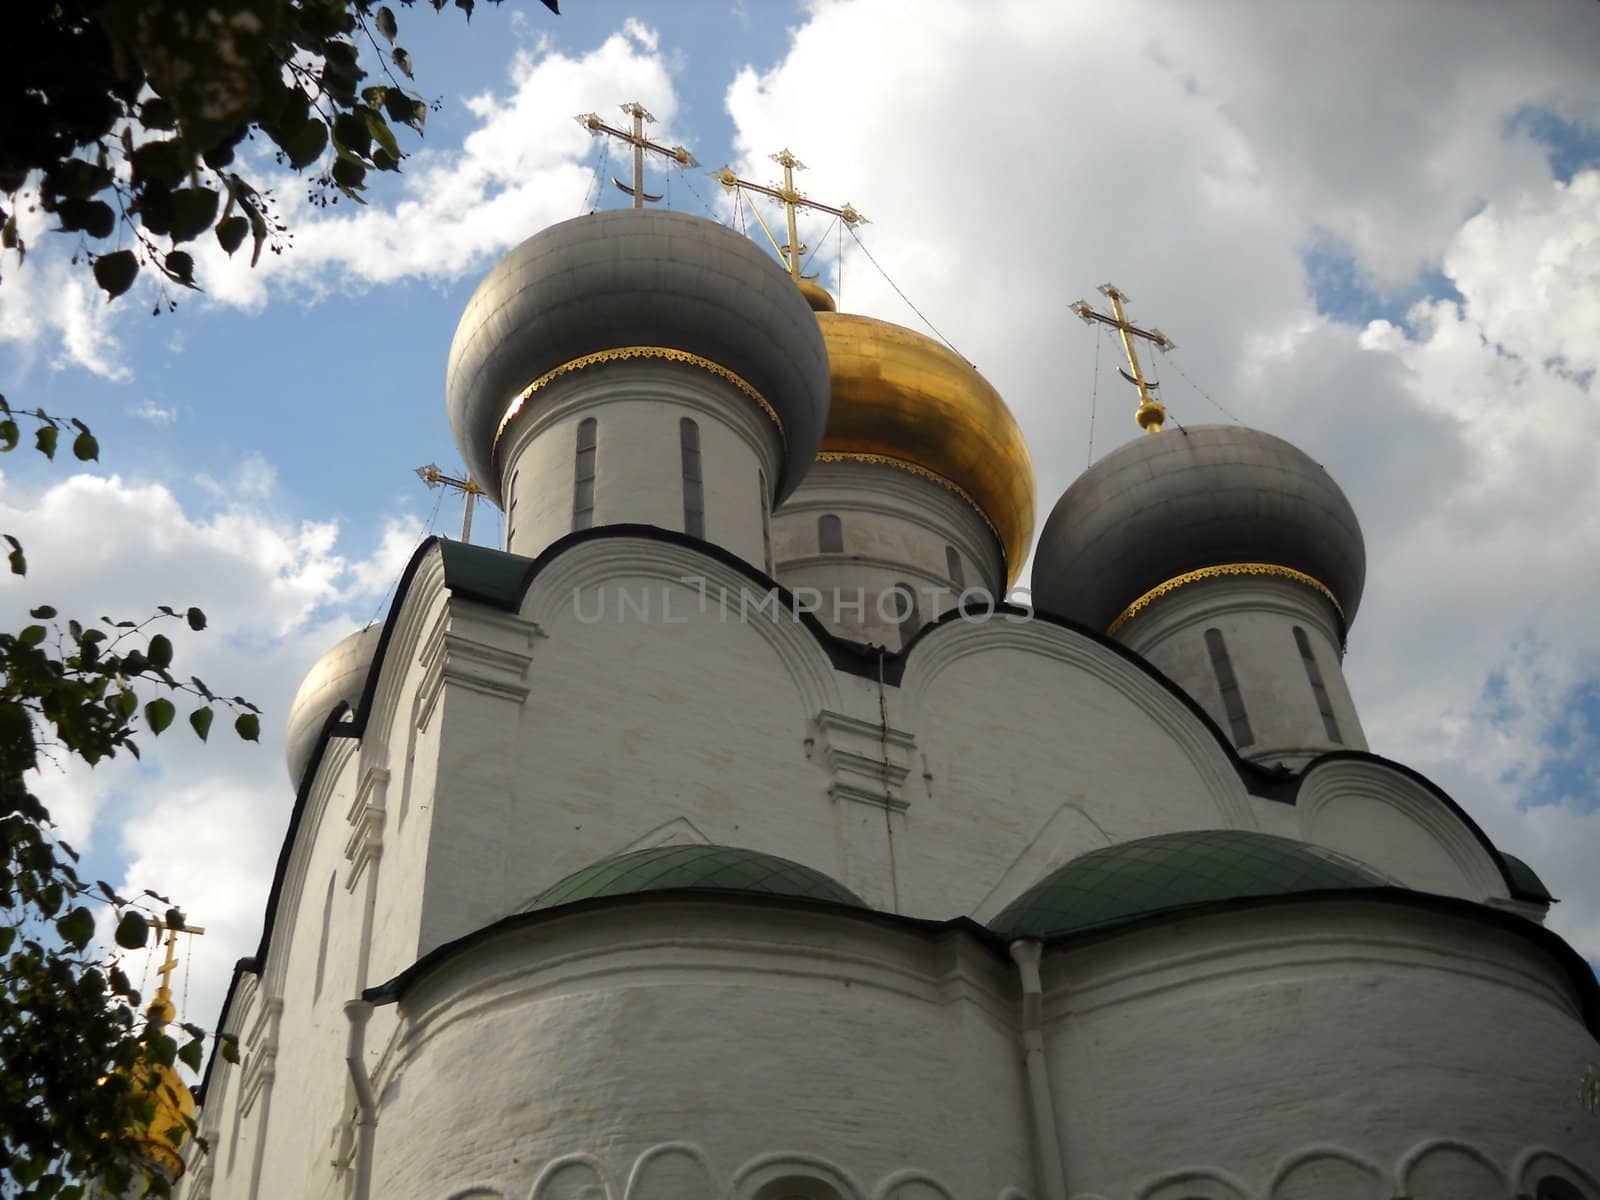 Temple, church, cathedral, religion, Orthodoxy, spirituality, architecture, domes, a cross, belief, pilgrimage, history, culture, an antiquity, Christianity, a belltower, the sky, clouds, Russia